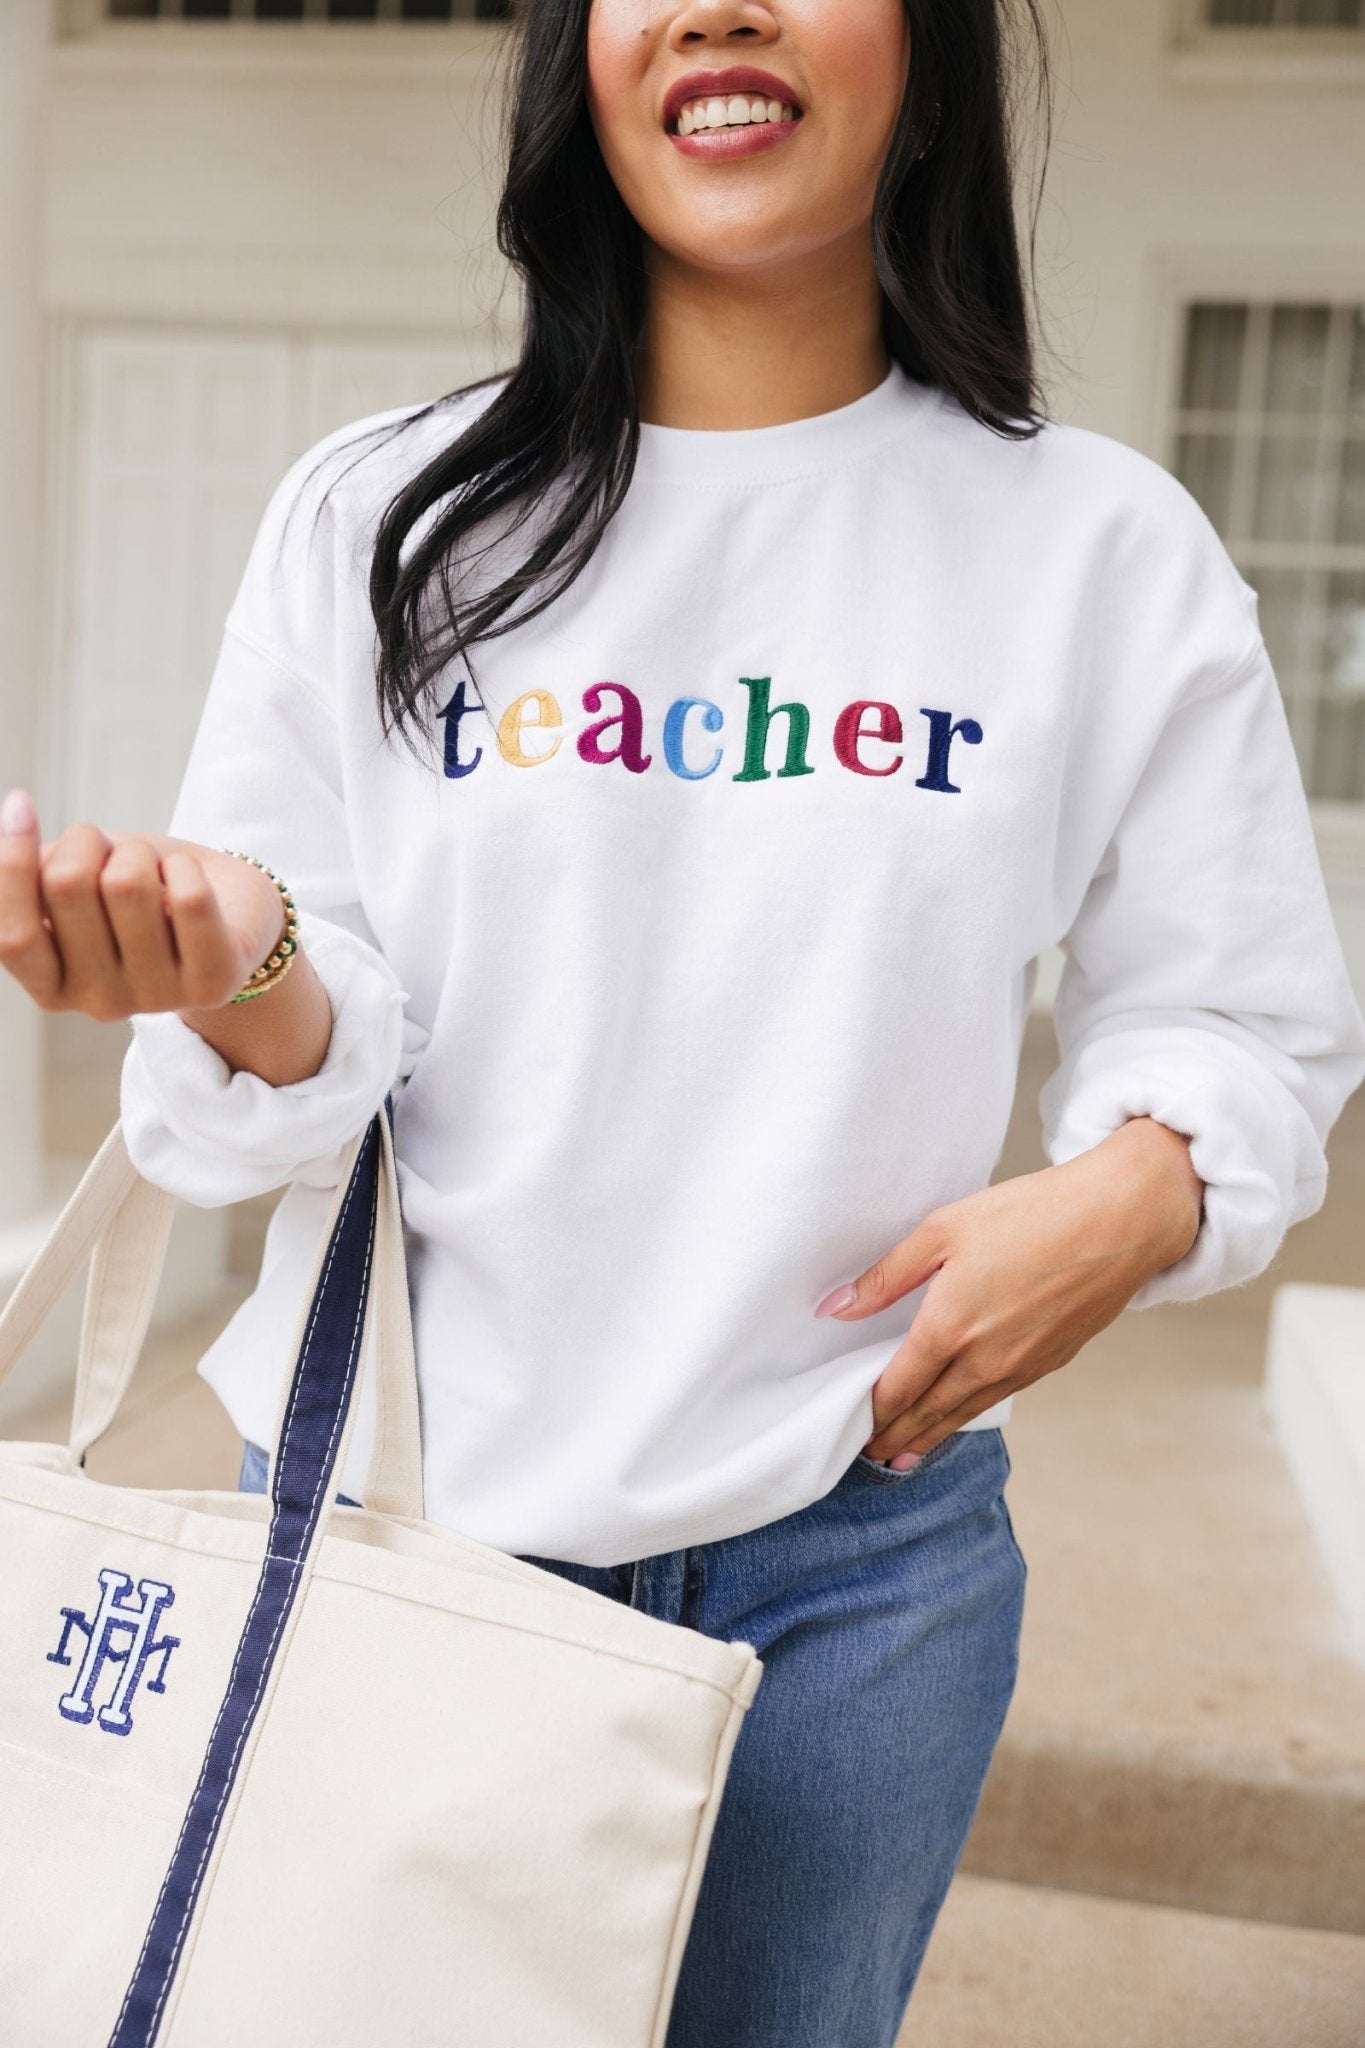 A white sweatshirt with embroidered multi-colored letters 